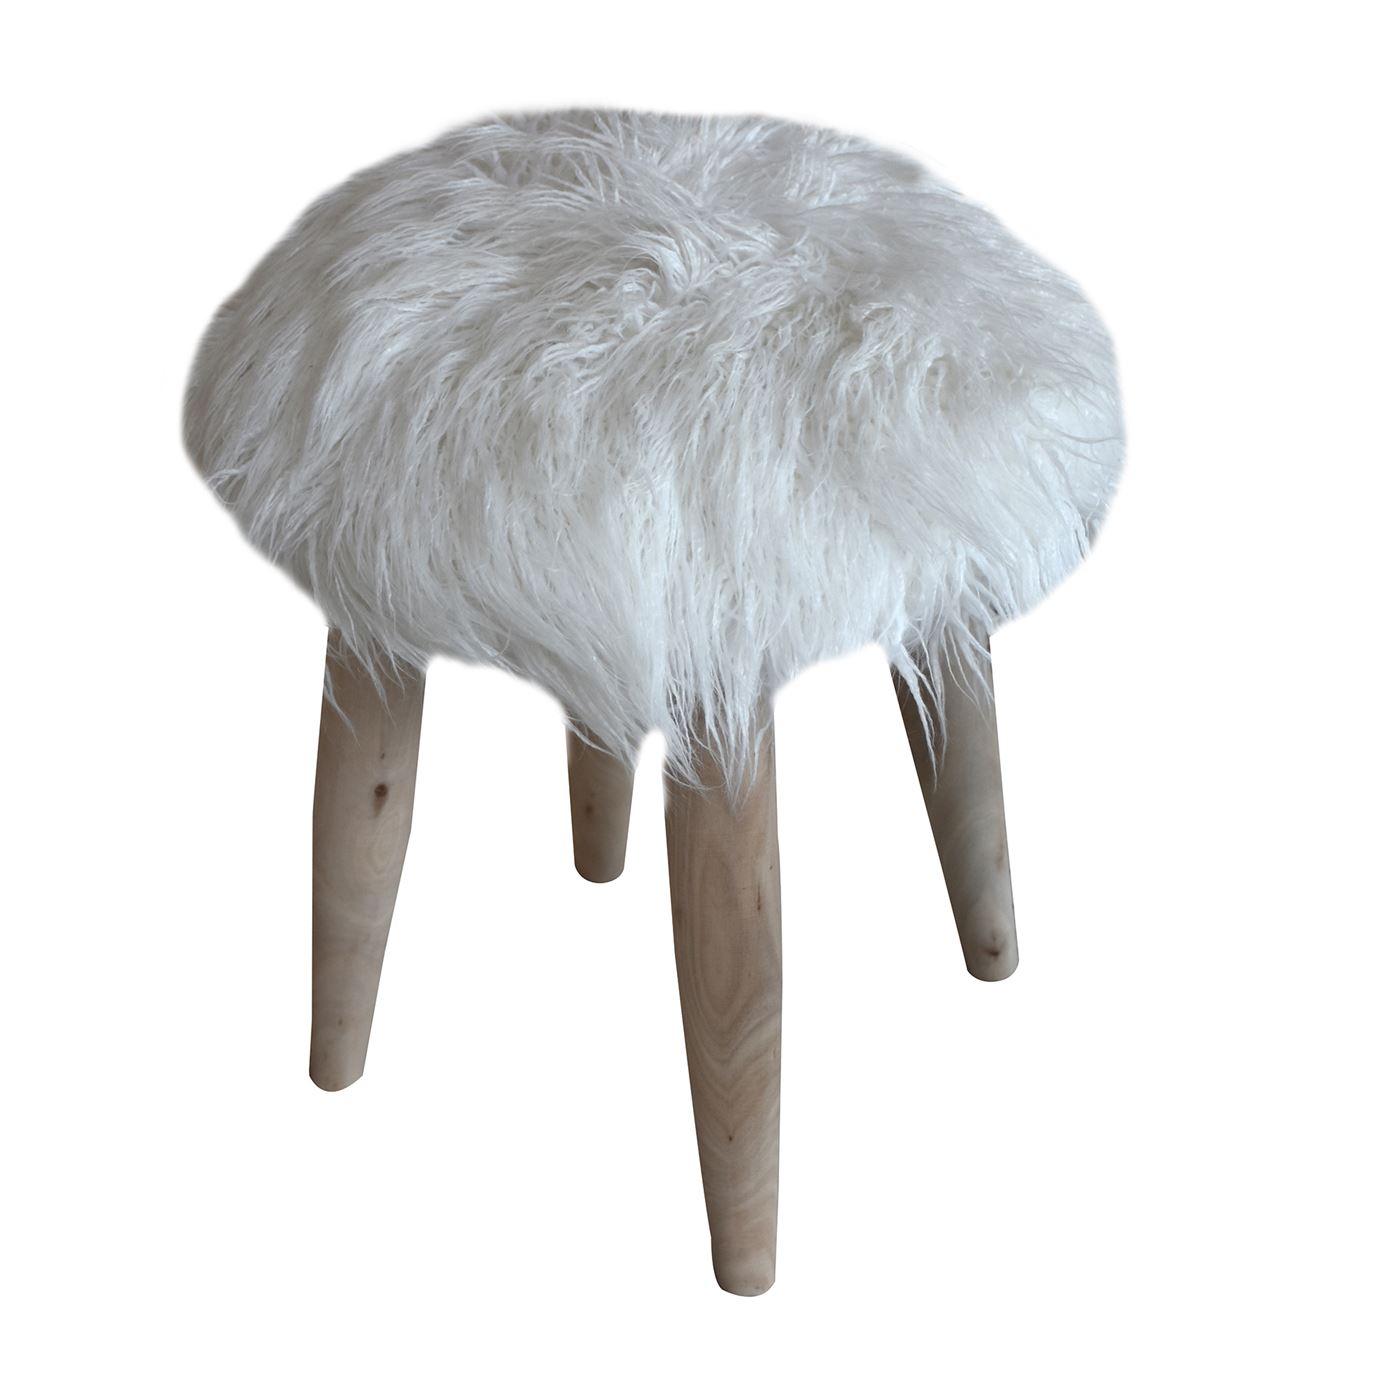 Sewells Round Stool,  Faux Leather, Natural White, Hm Stitching, Flat Weave 